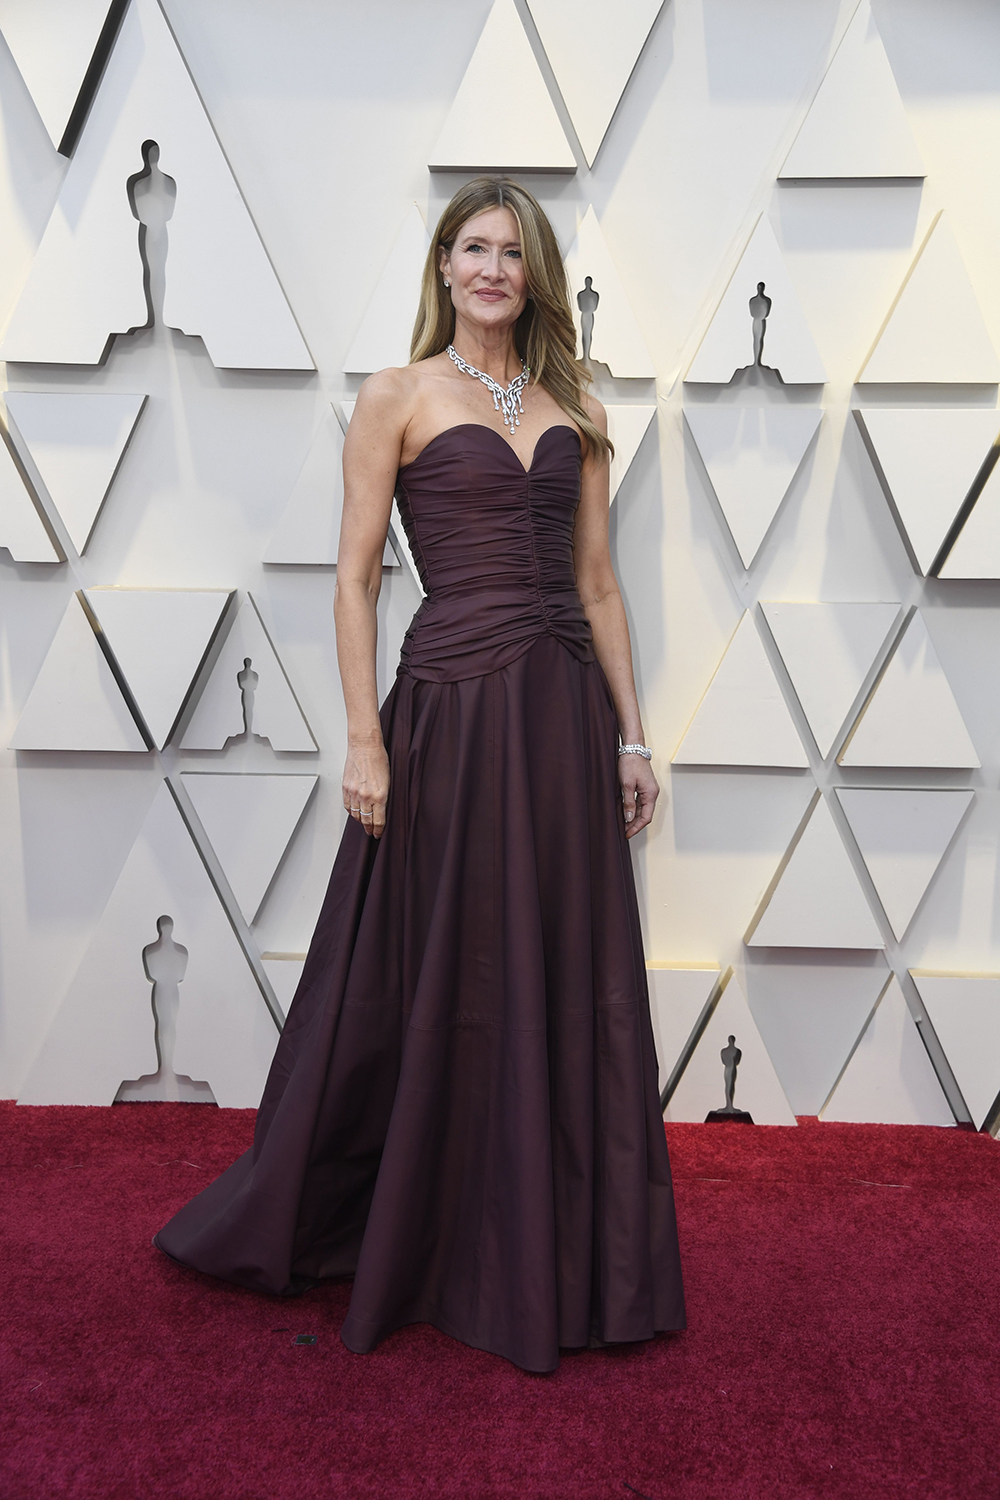 HOLLYWOOD, CALIFORNIA - FEBRUARY 24: Laura Dern attends the 91st Annual Academy Awards at Hollywood and Highland on February 24, 2019 in Hollywood, California. (Photo by Frazer Harrison/Getty Images)